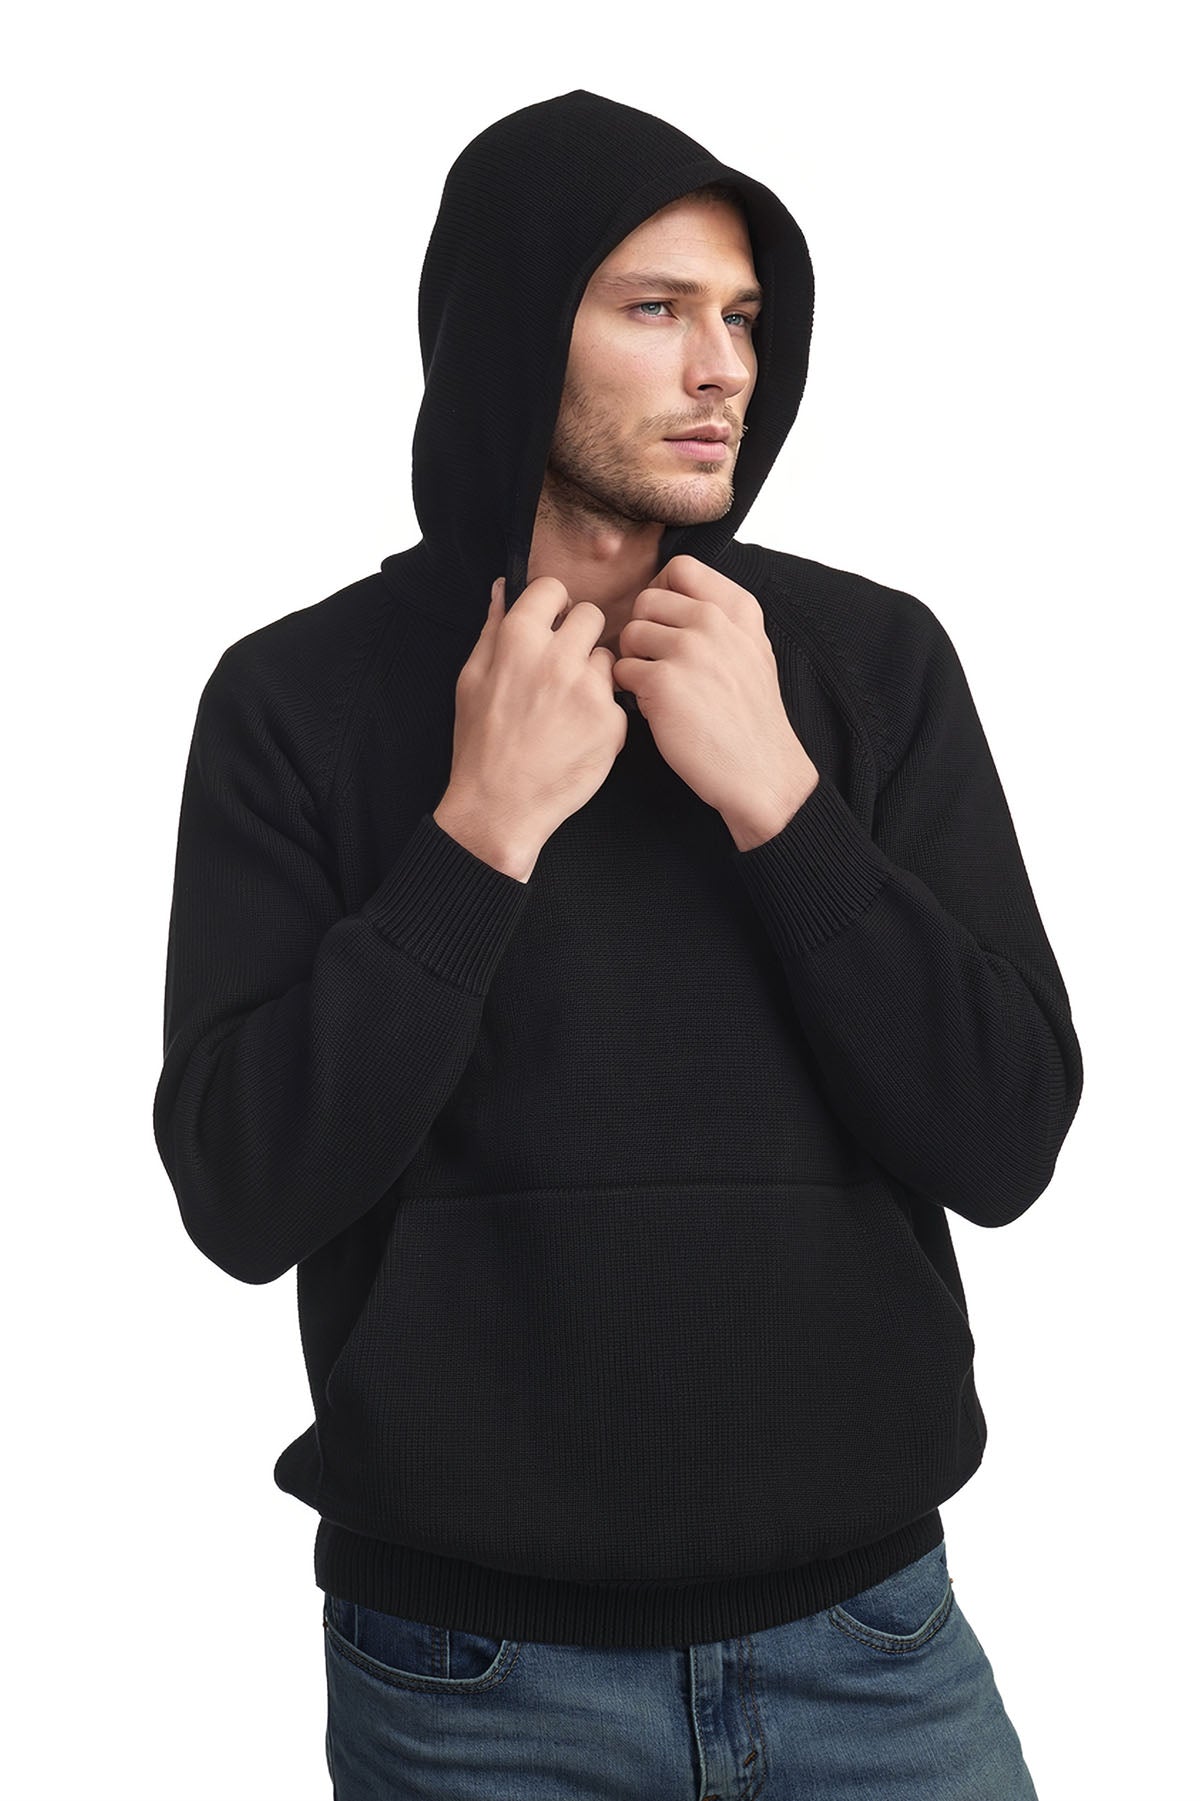 Hooded Pullover Black 100% Cotton